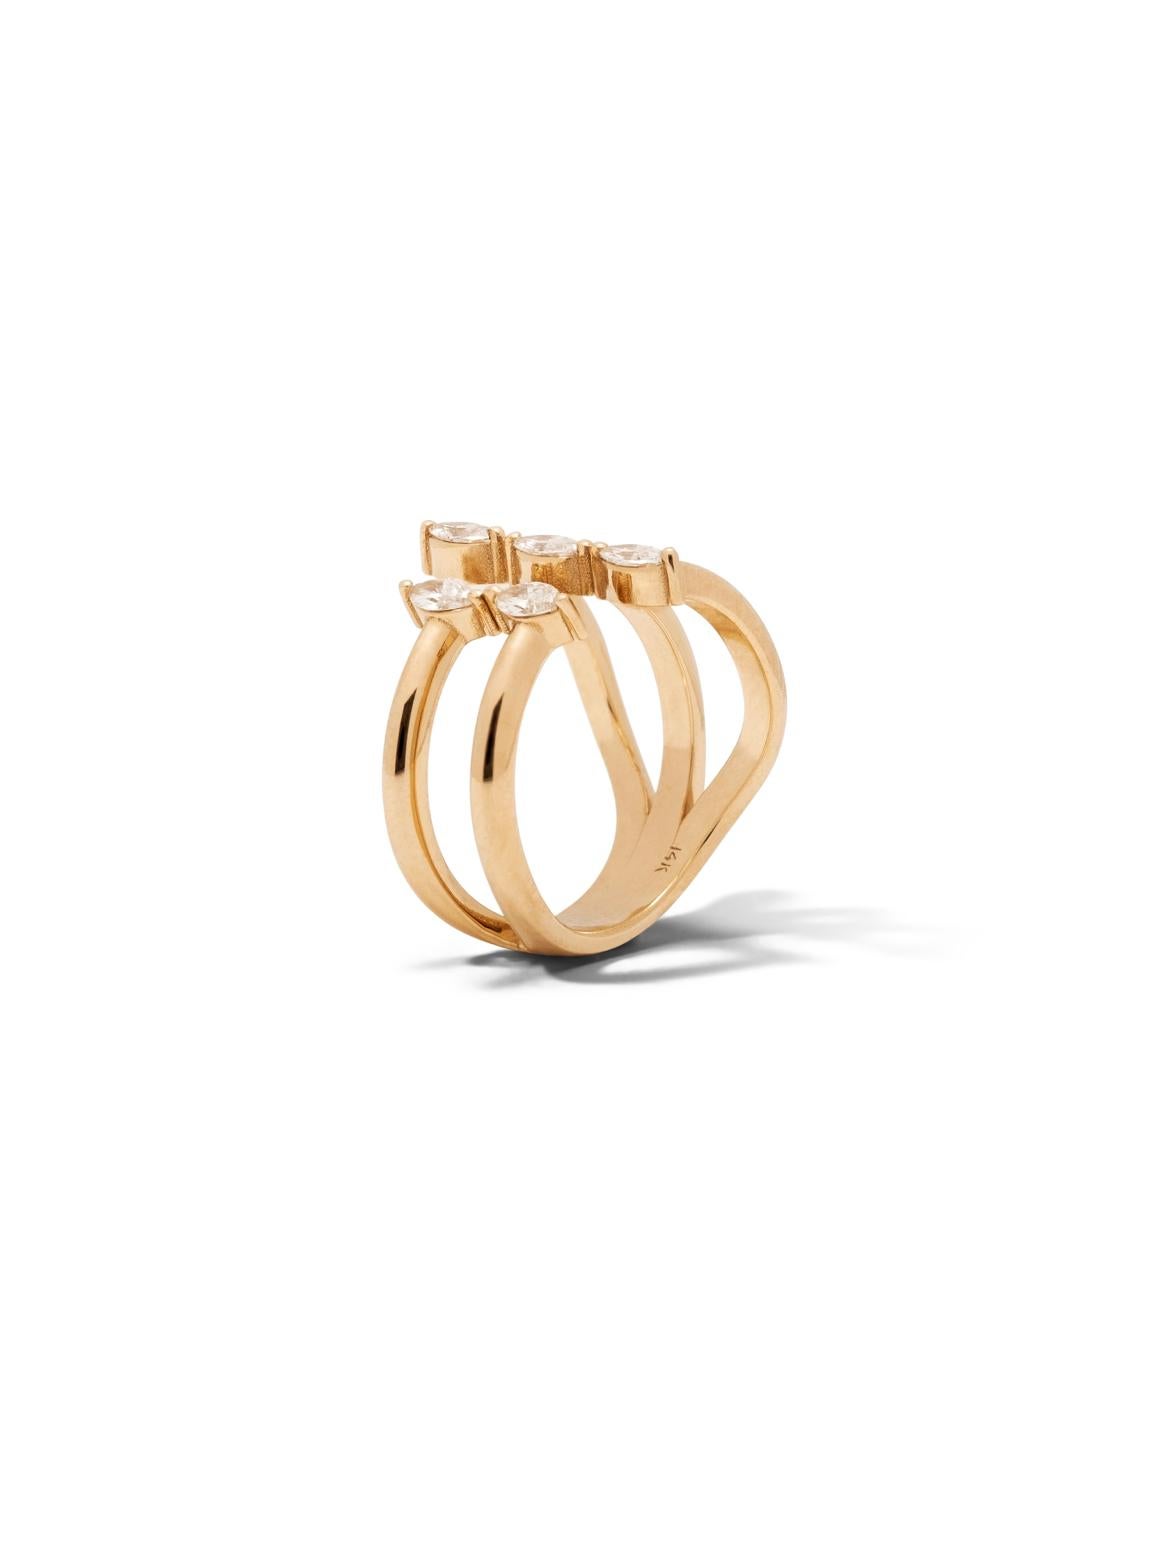 Asymmetry has never looked this perfect. The open ring design features marquise cut diamonds set in brilliant 14K gold. The ring bands elegantly converge together to the back. This handcrafted beauty will magnificently adorn your hand and take your